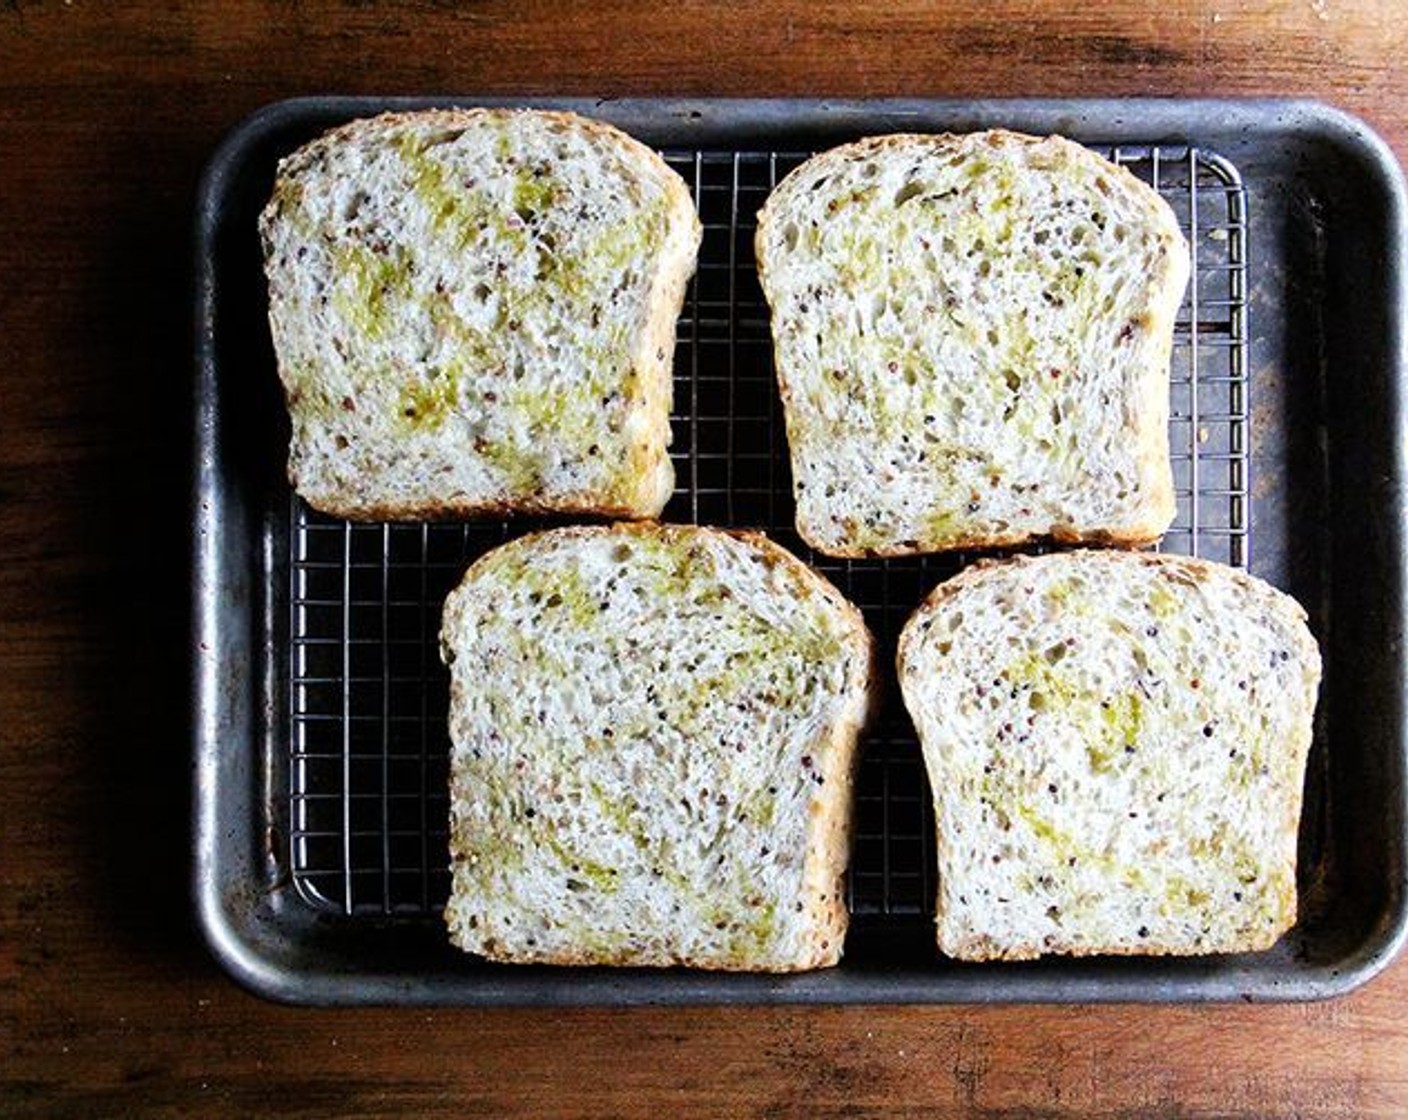 step 11 Arrange Bread (4 slices) on a cooling rack set on a sheet pan. Drizzle lightly with Extra-Virgin Olive Oil (as needed). Broil for 2 minutes or until lightly golden, keeping a close watch.